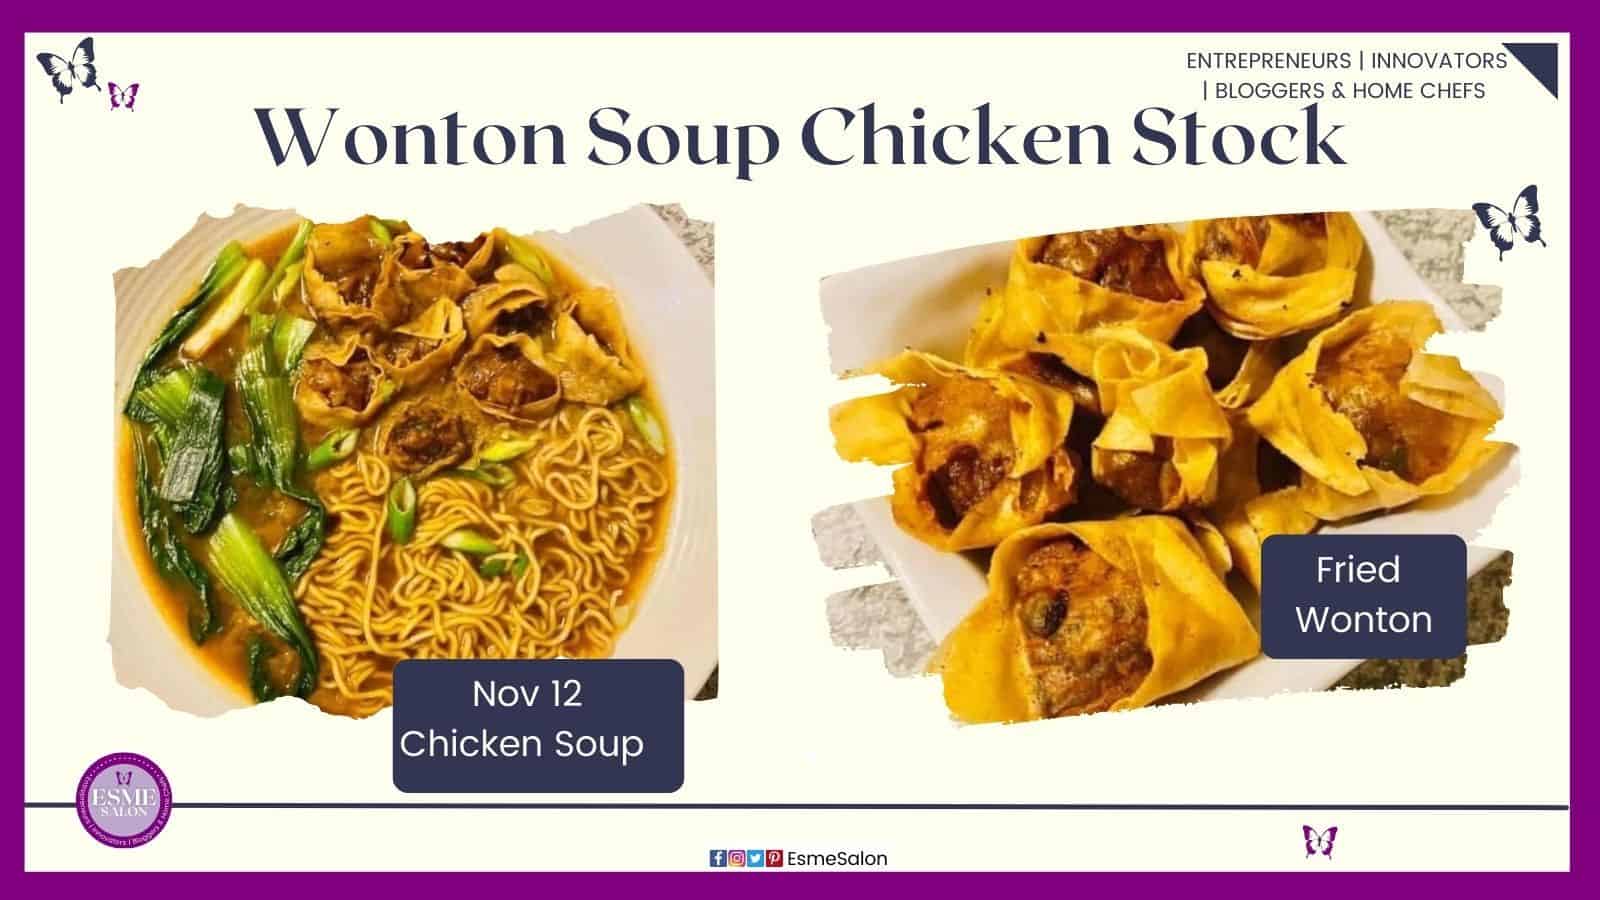 an image of a bowl of Wonton Soup Chicken Stock with green and fried wonton on the side